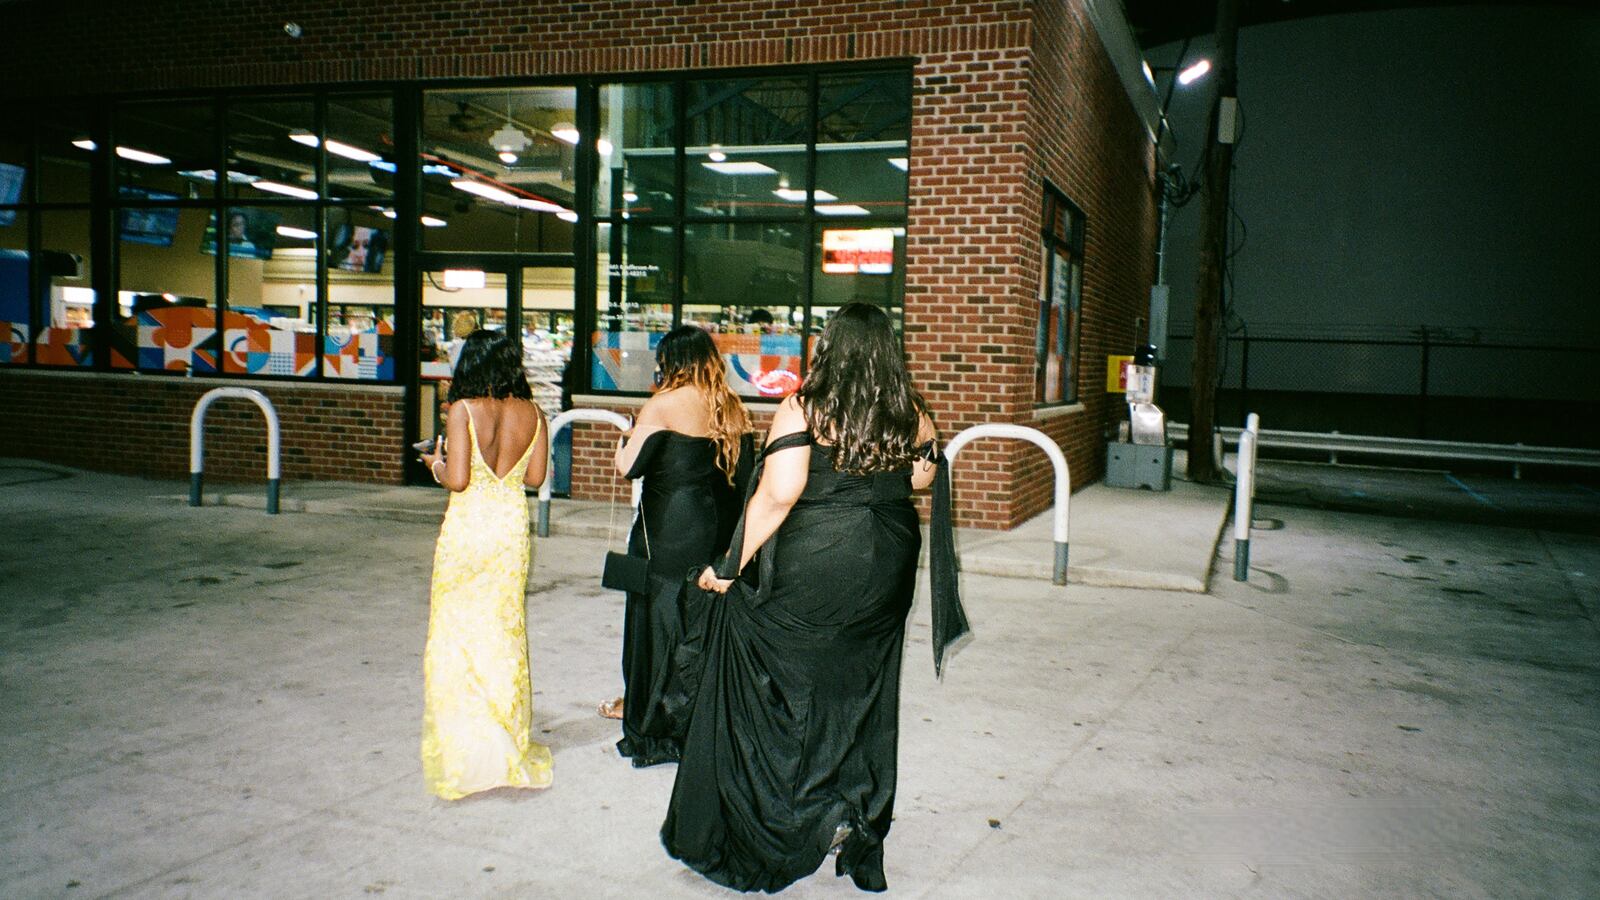 Three young women in prom dresses make their way toward a convenience store.